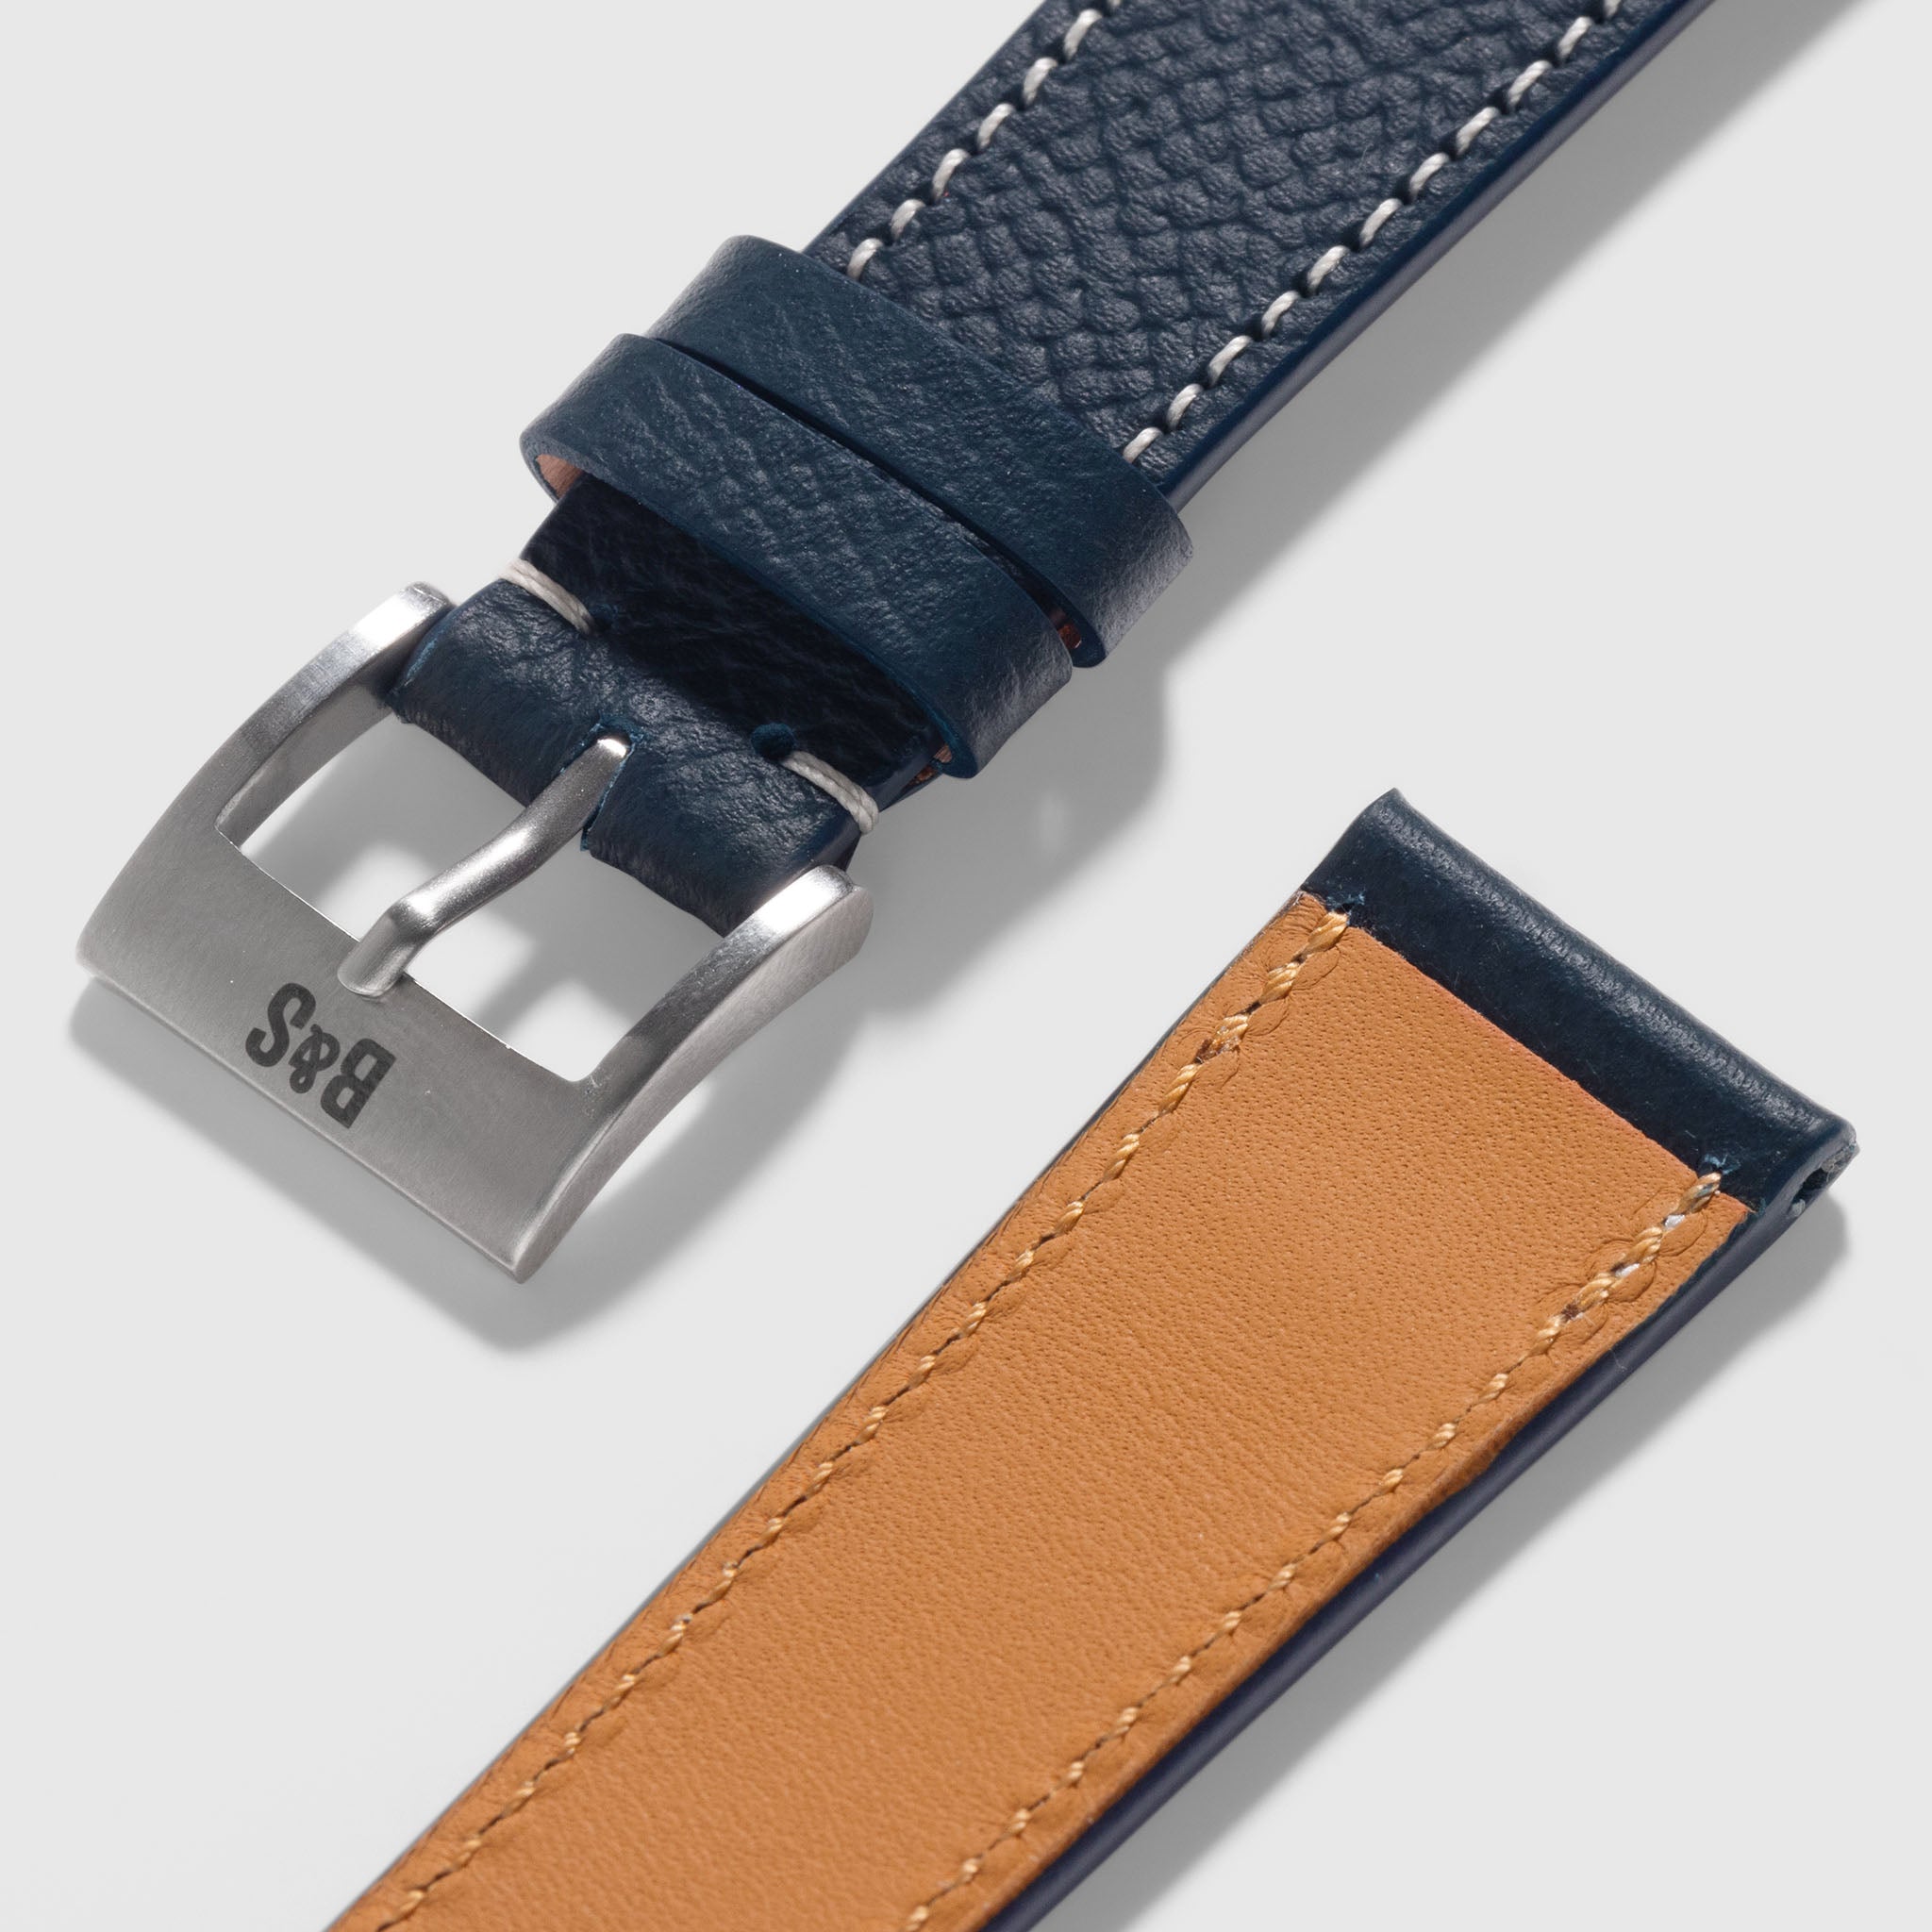 Patek Phillipe World time 5110G with Blue Epsom Leather Watch Strap